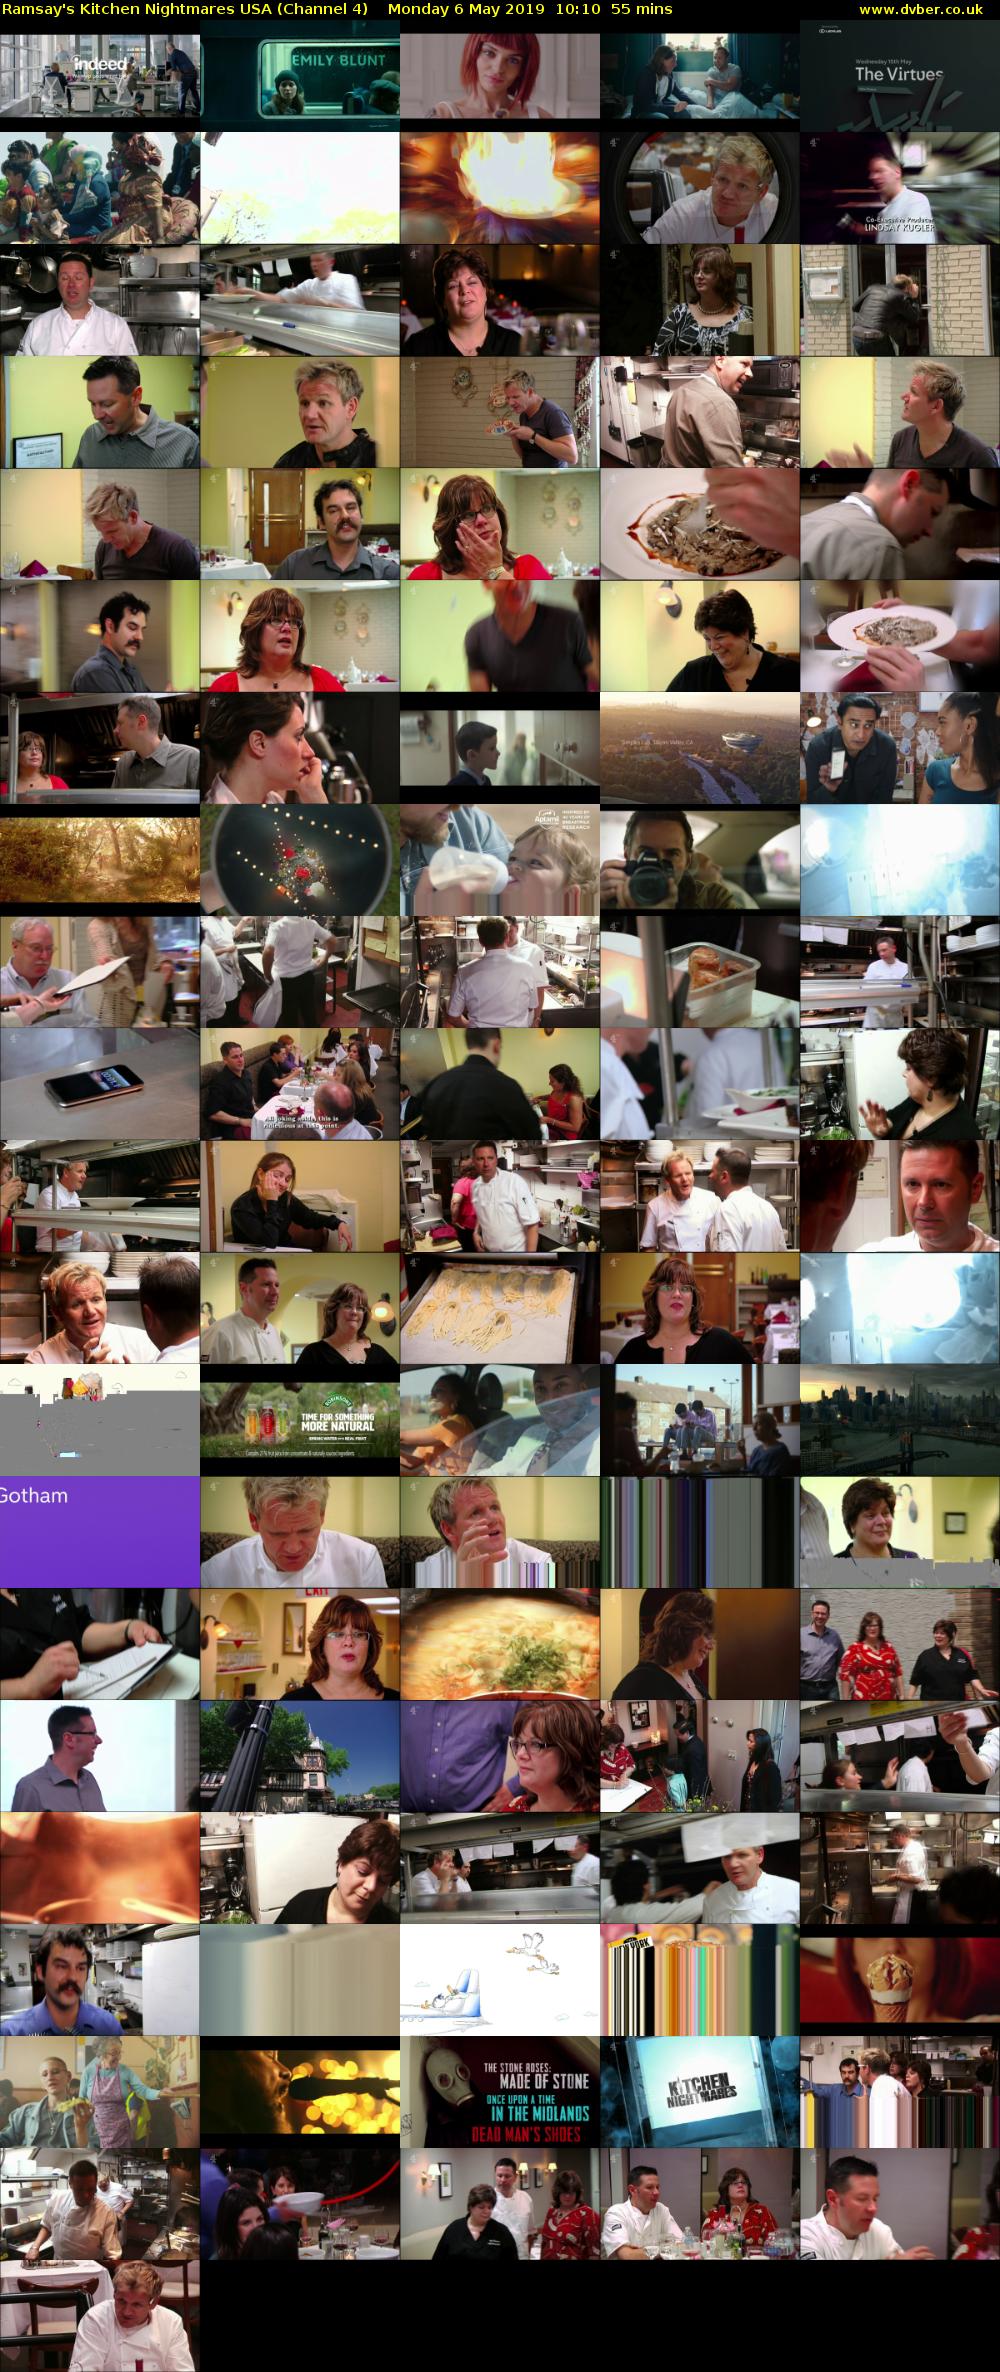 Ramsay's Kitchen Nightmares USA (Channel 4) Monday 6 May 2019 10:10 - 11:05